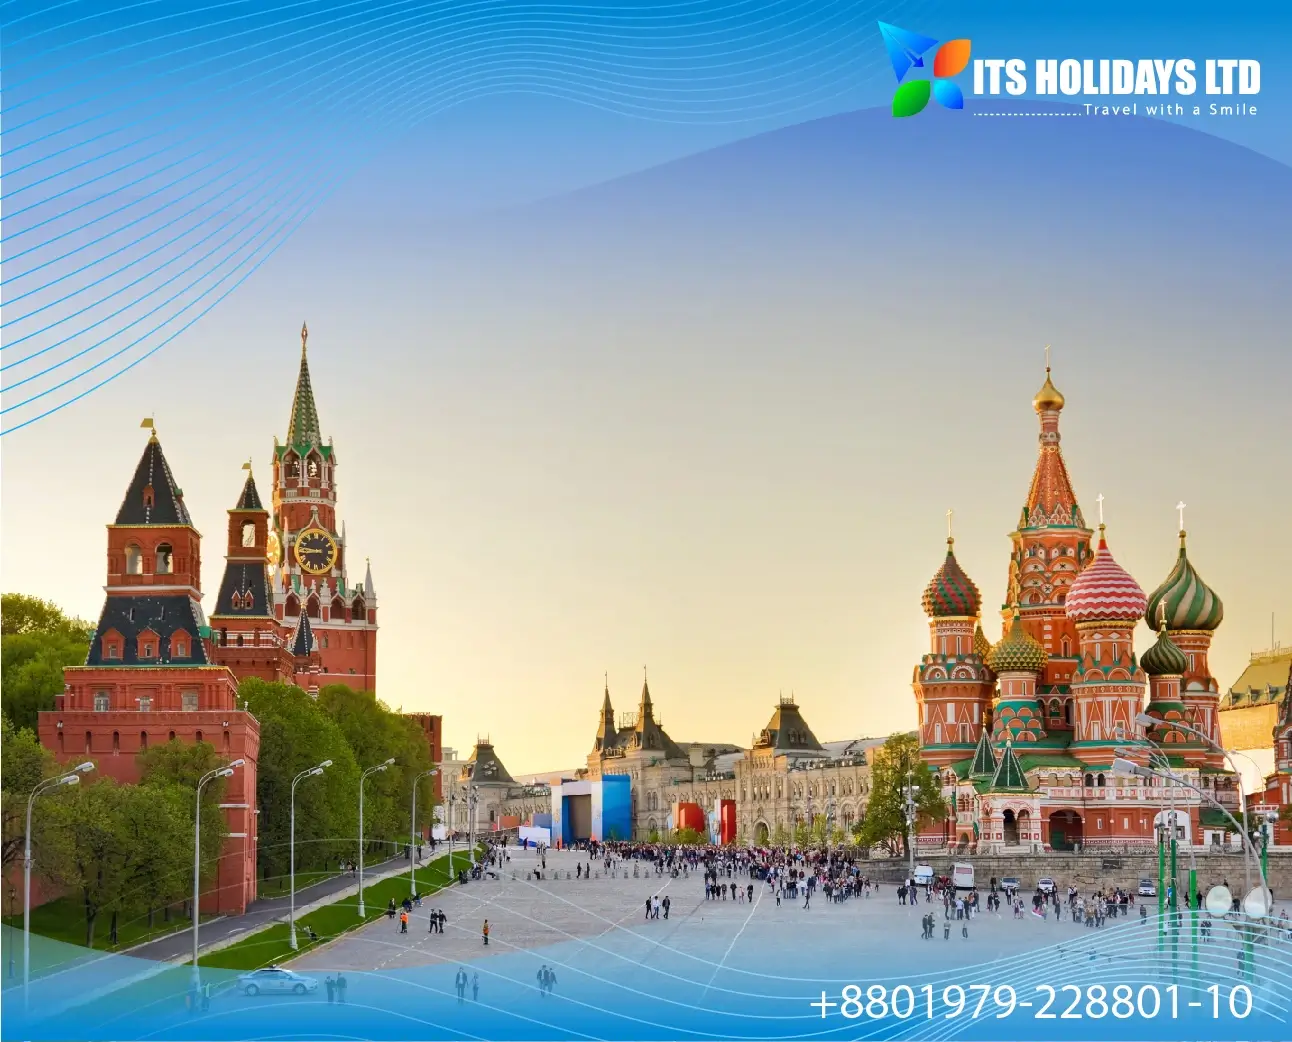 Moscow & Saint Petersburg Tour Package From Bangladesh